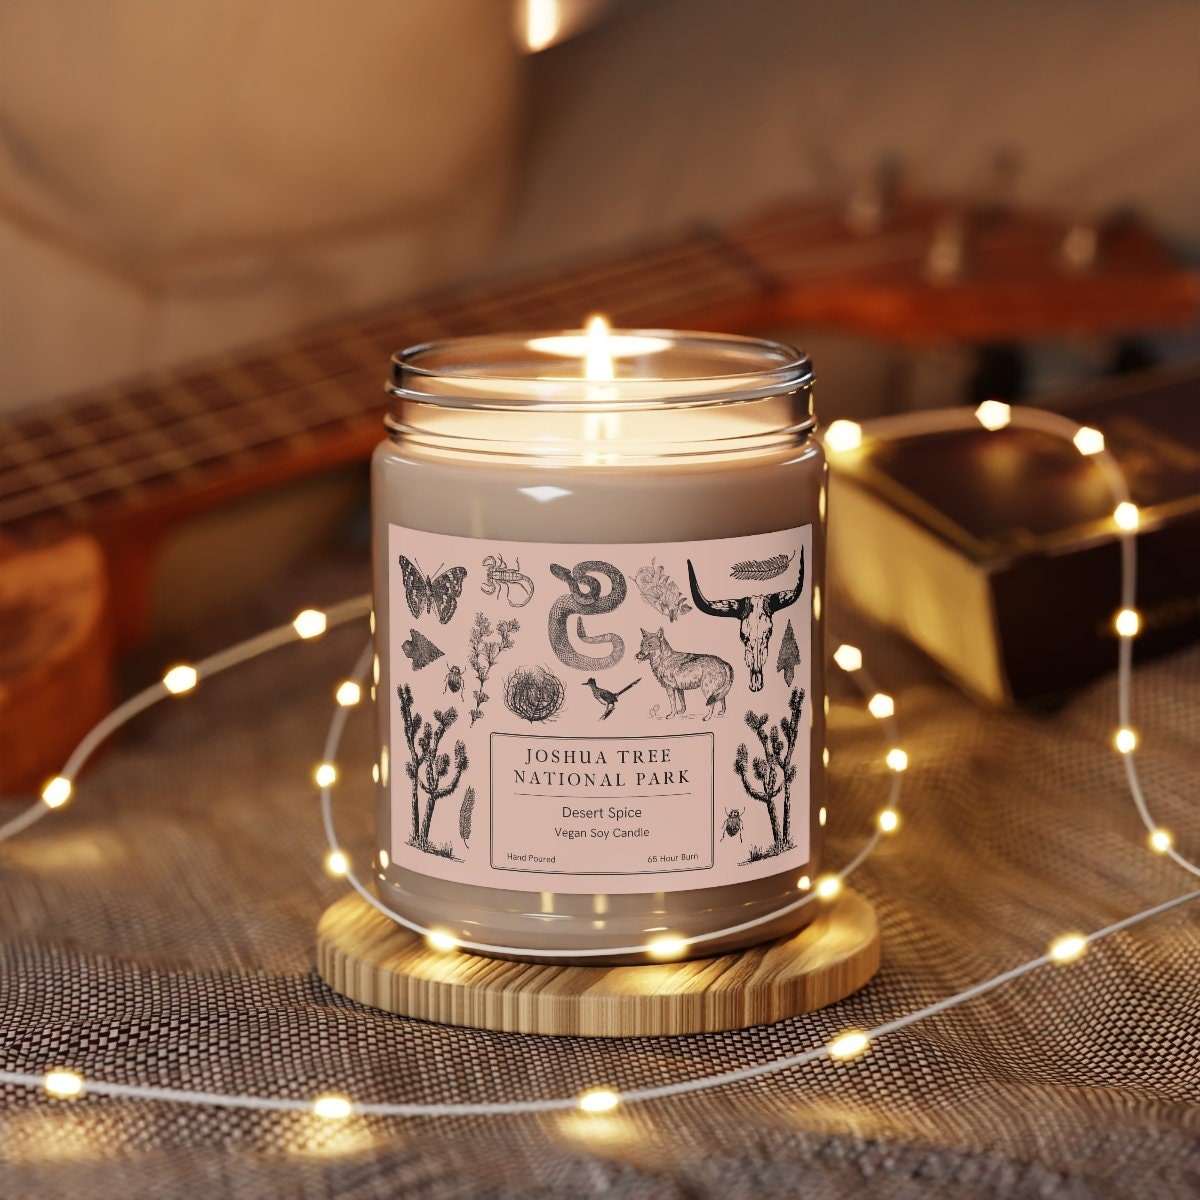 Joshua Tree National Park Hand-Poured Soy CandleThe Joshua Tree Desert Spice scented candle comes in 9 oz jars and brings the desert breeze and blooms of Joshua Tree National Park in Southern California into your 